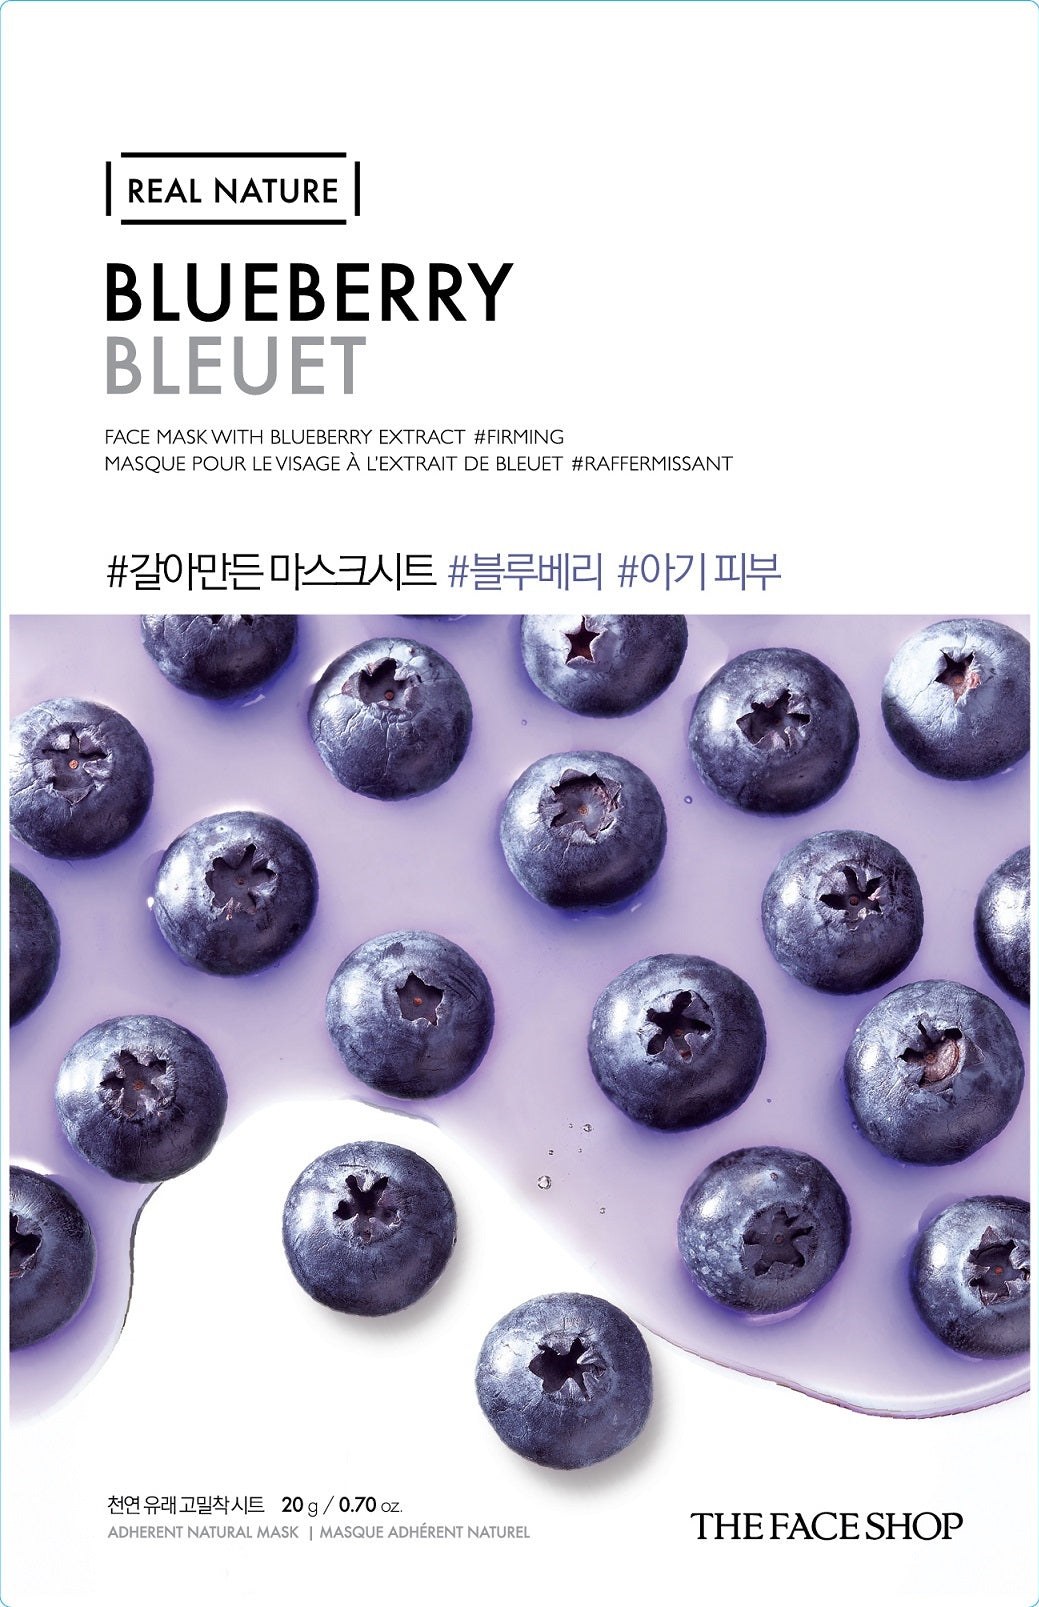 REAL NATURE BLUEBERRY FACE MASK - 20G